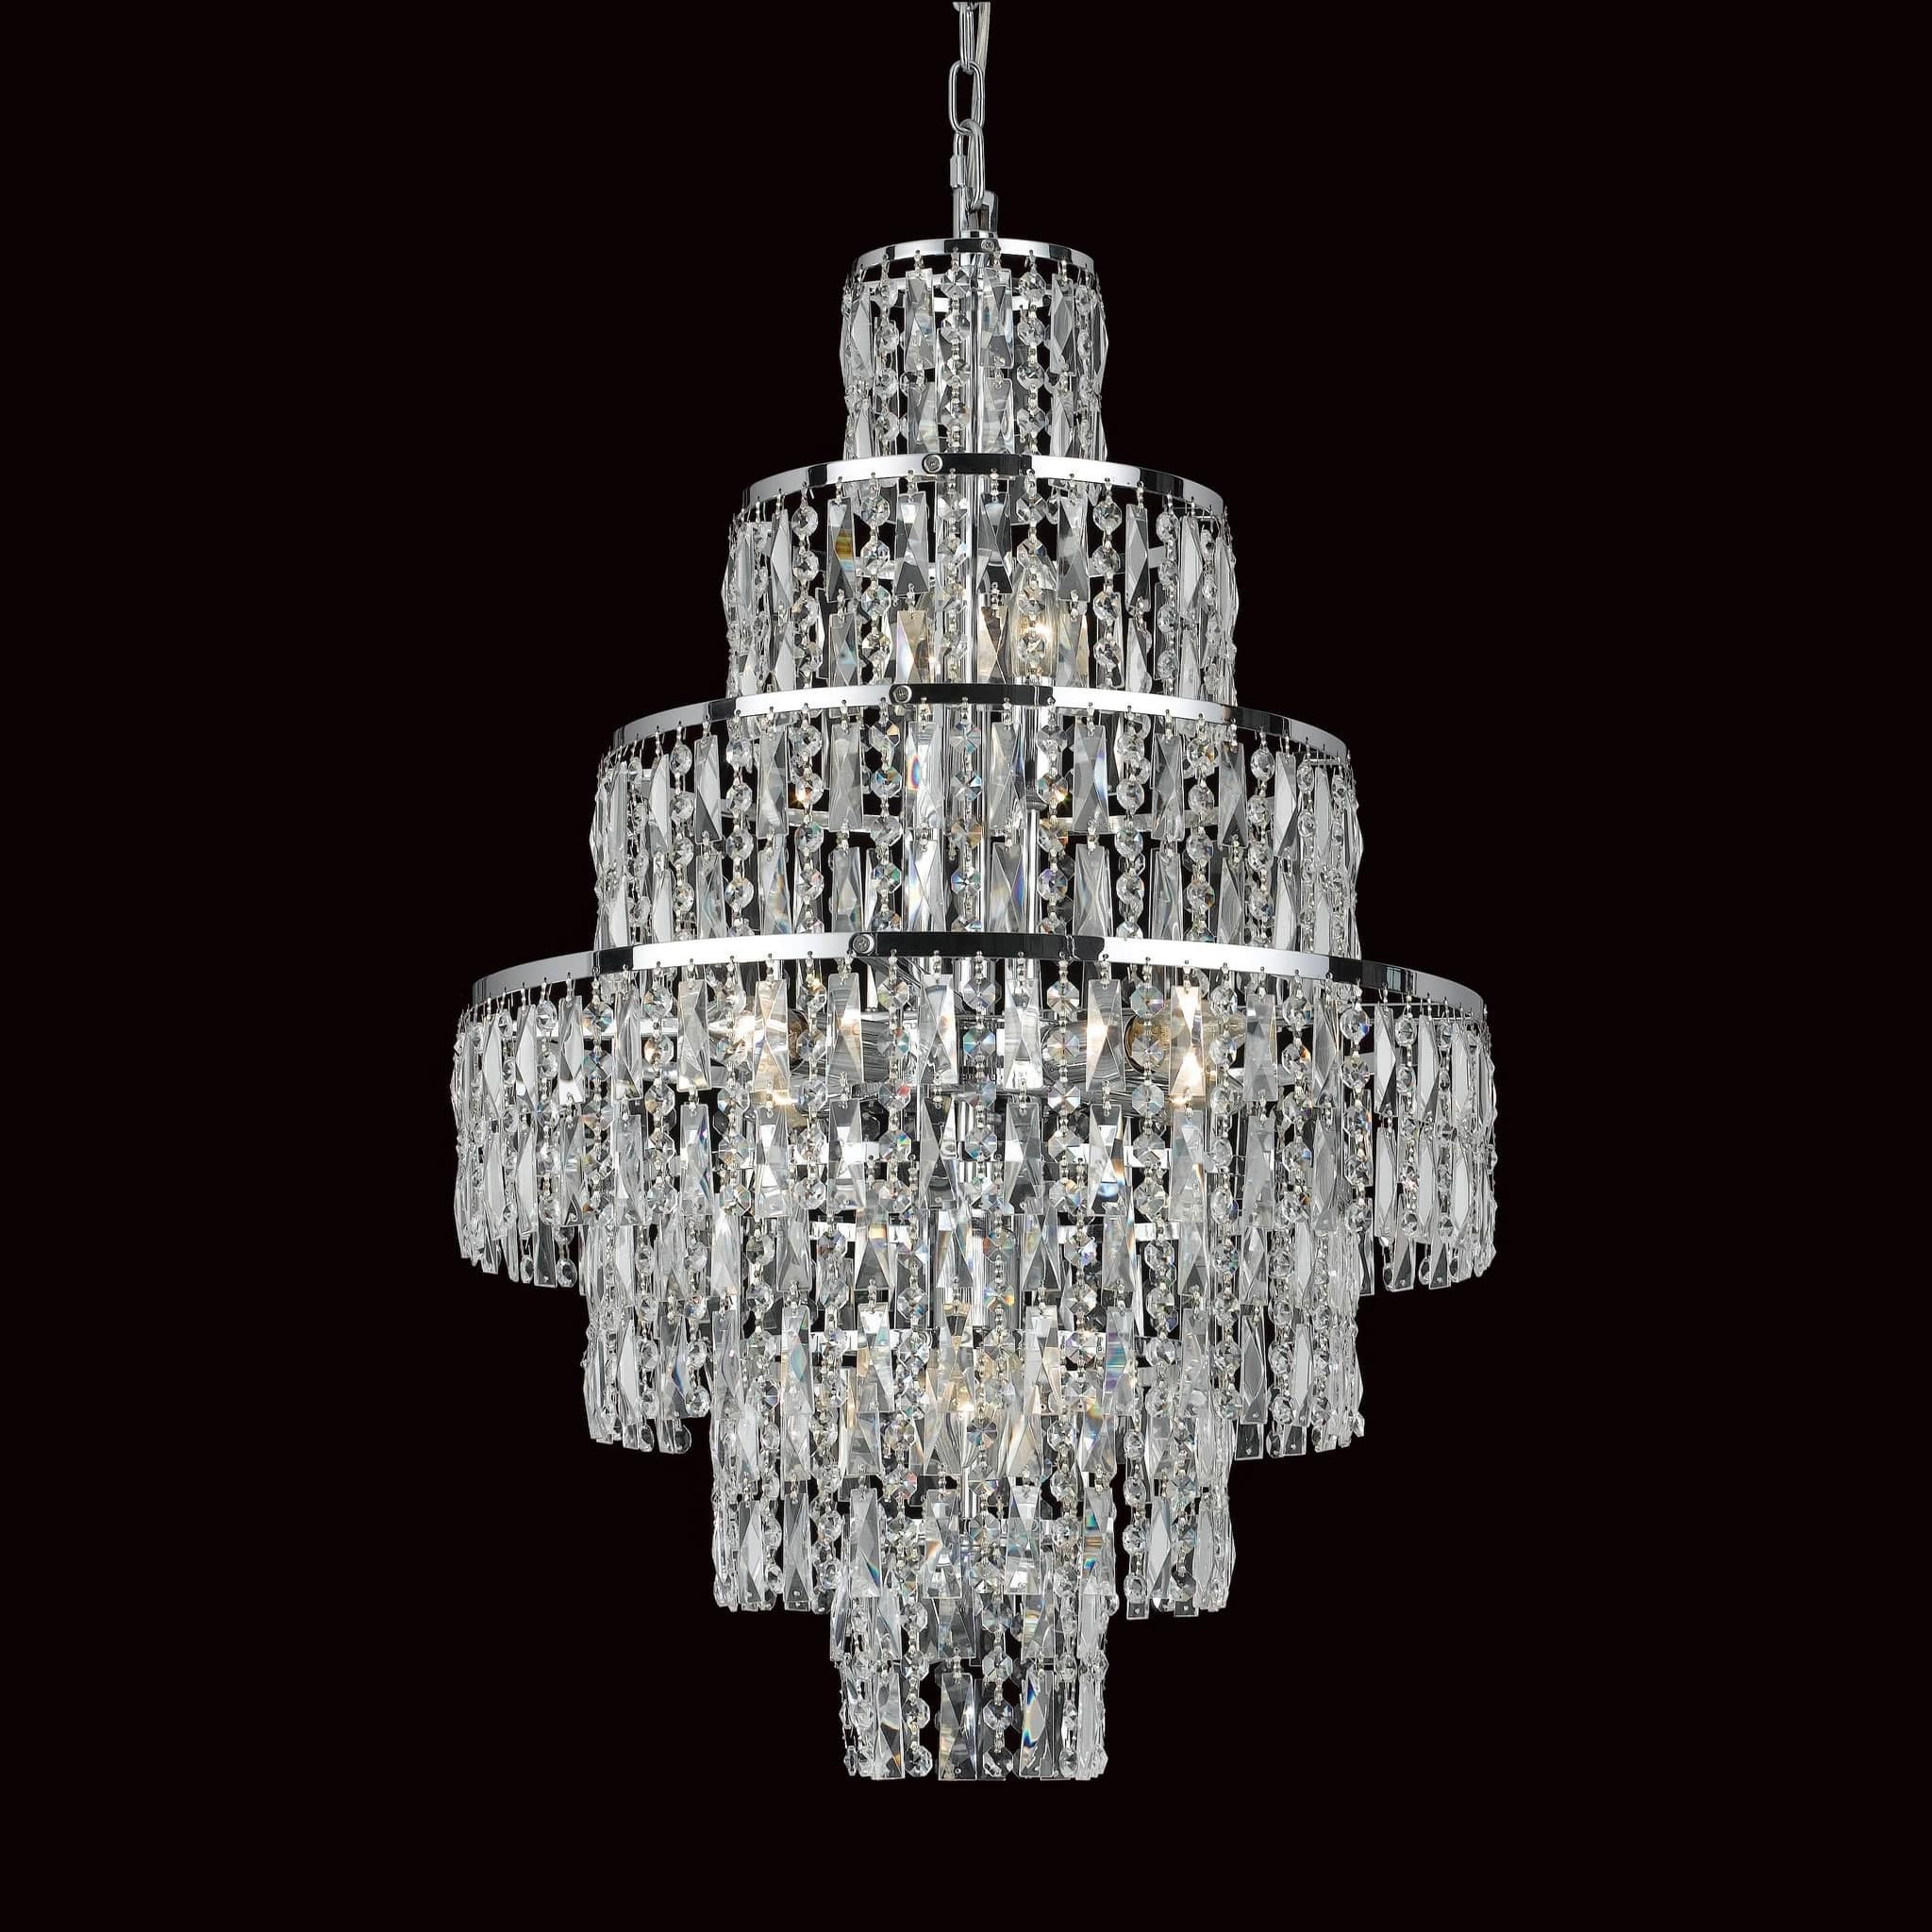 Well Known Chrome And Crystal Led Chandeliers Regarding Impex Cf03220/08/ch New York 8 Light Cascade Chandelier (View 14 of 20)